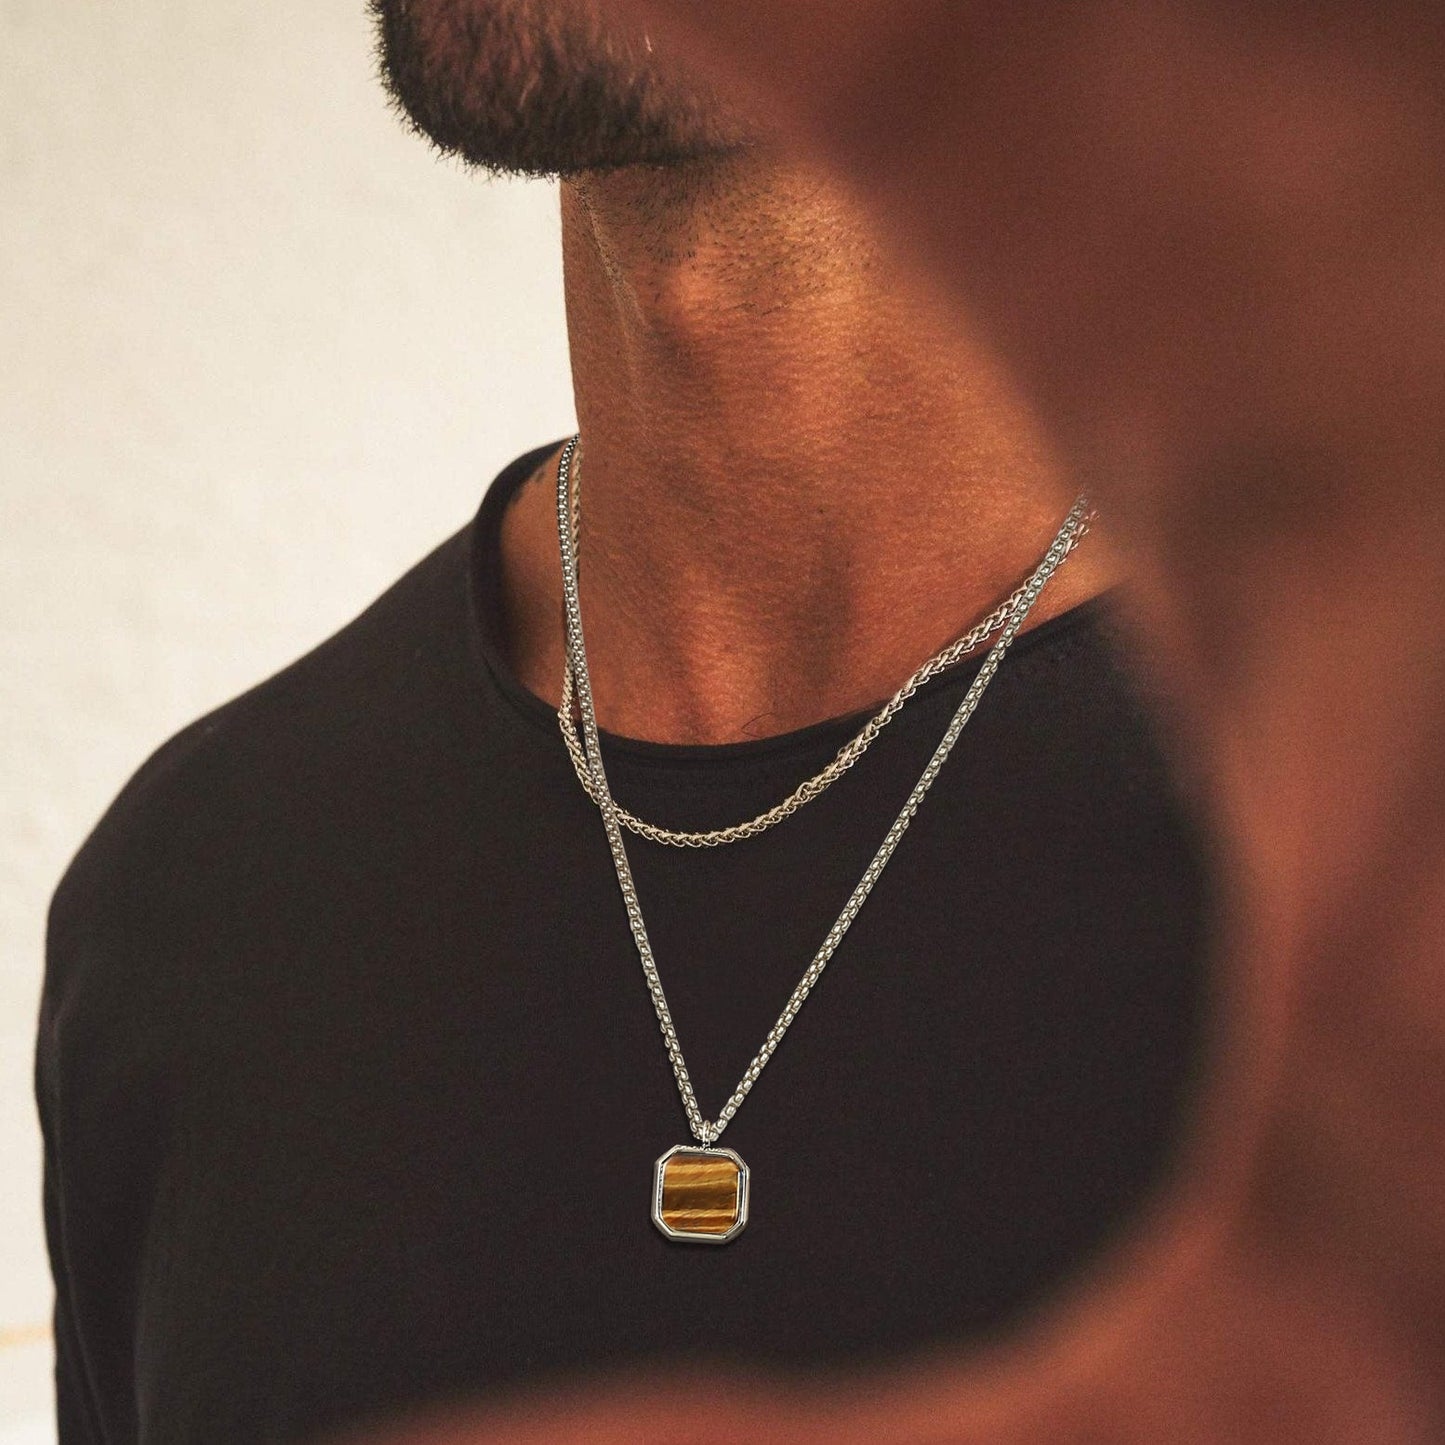 Layered Necklaces With Geometric Natural Stone Square Pendant